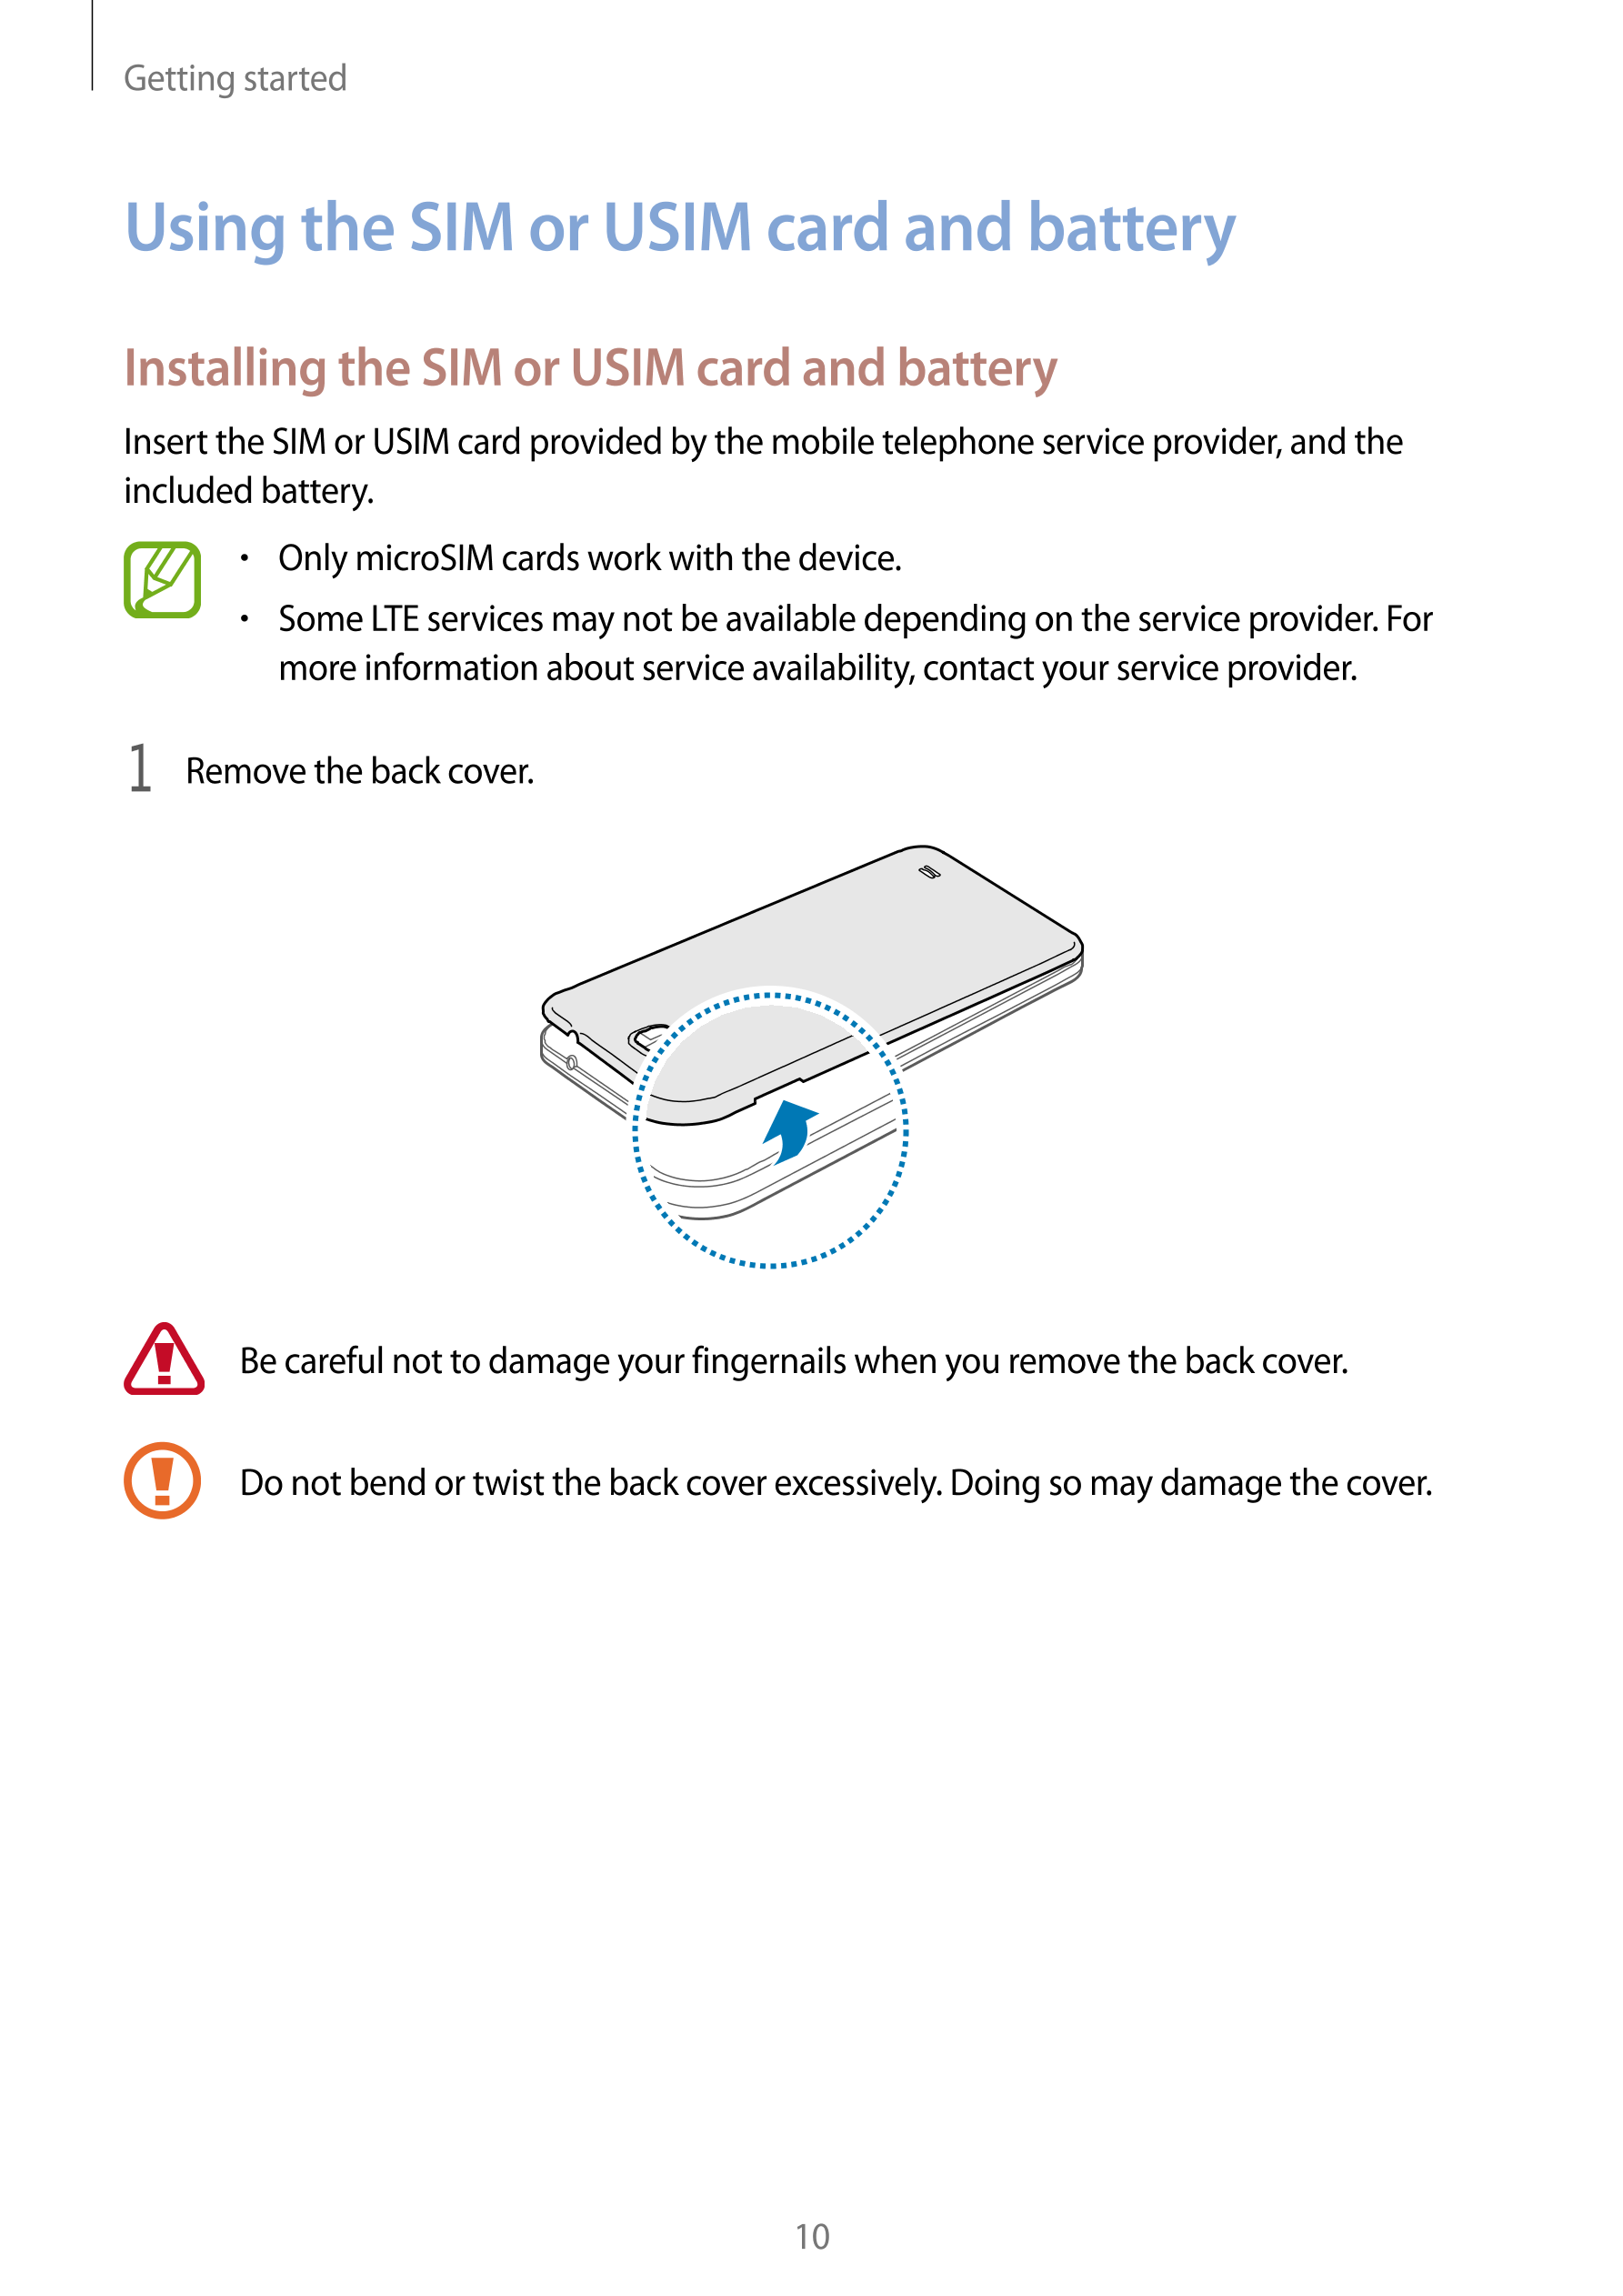 Getting started
Using the SIM or USIM card and battery
Installing the SIM or USIM card and battery
Insert the SIM or USIM card p